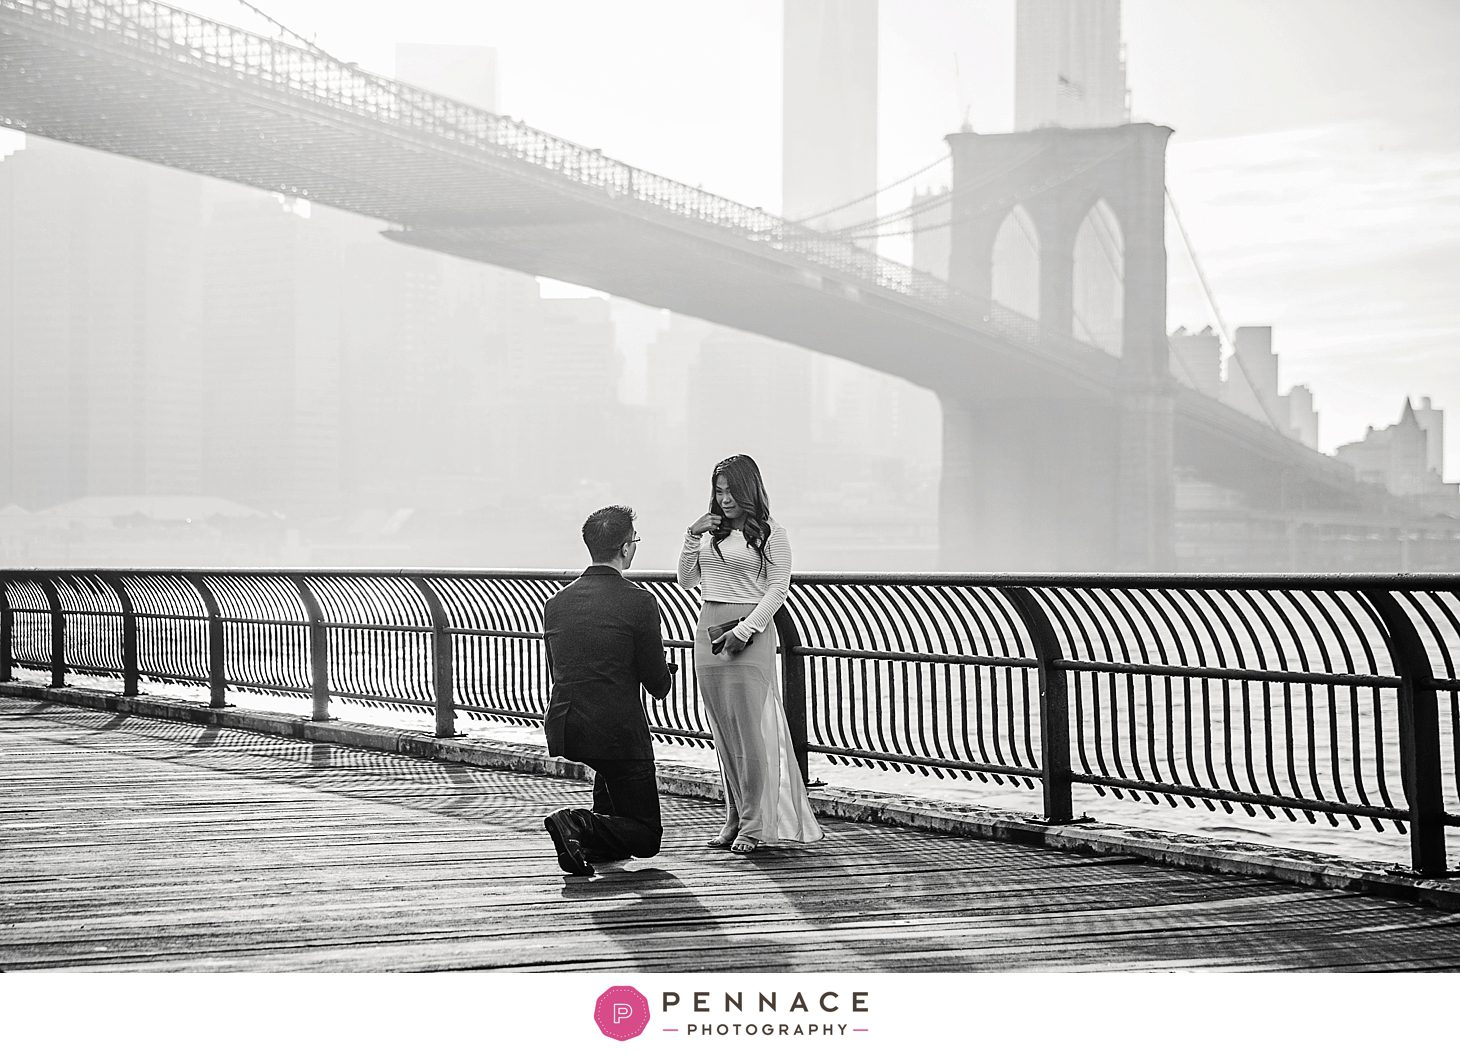 By Laura Pennace - http://www.facebook.com/pennacephotography